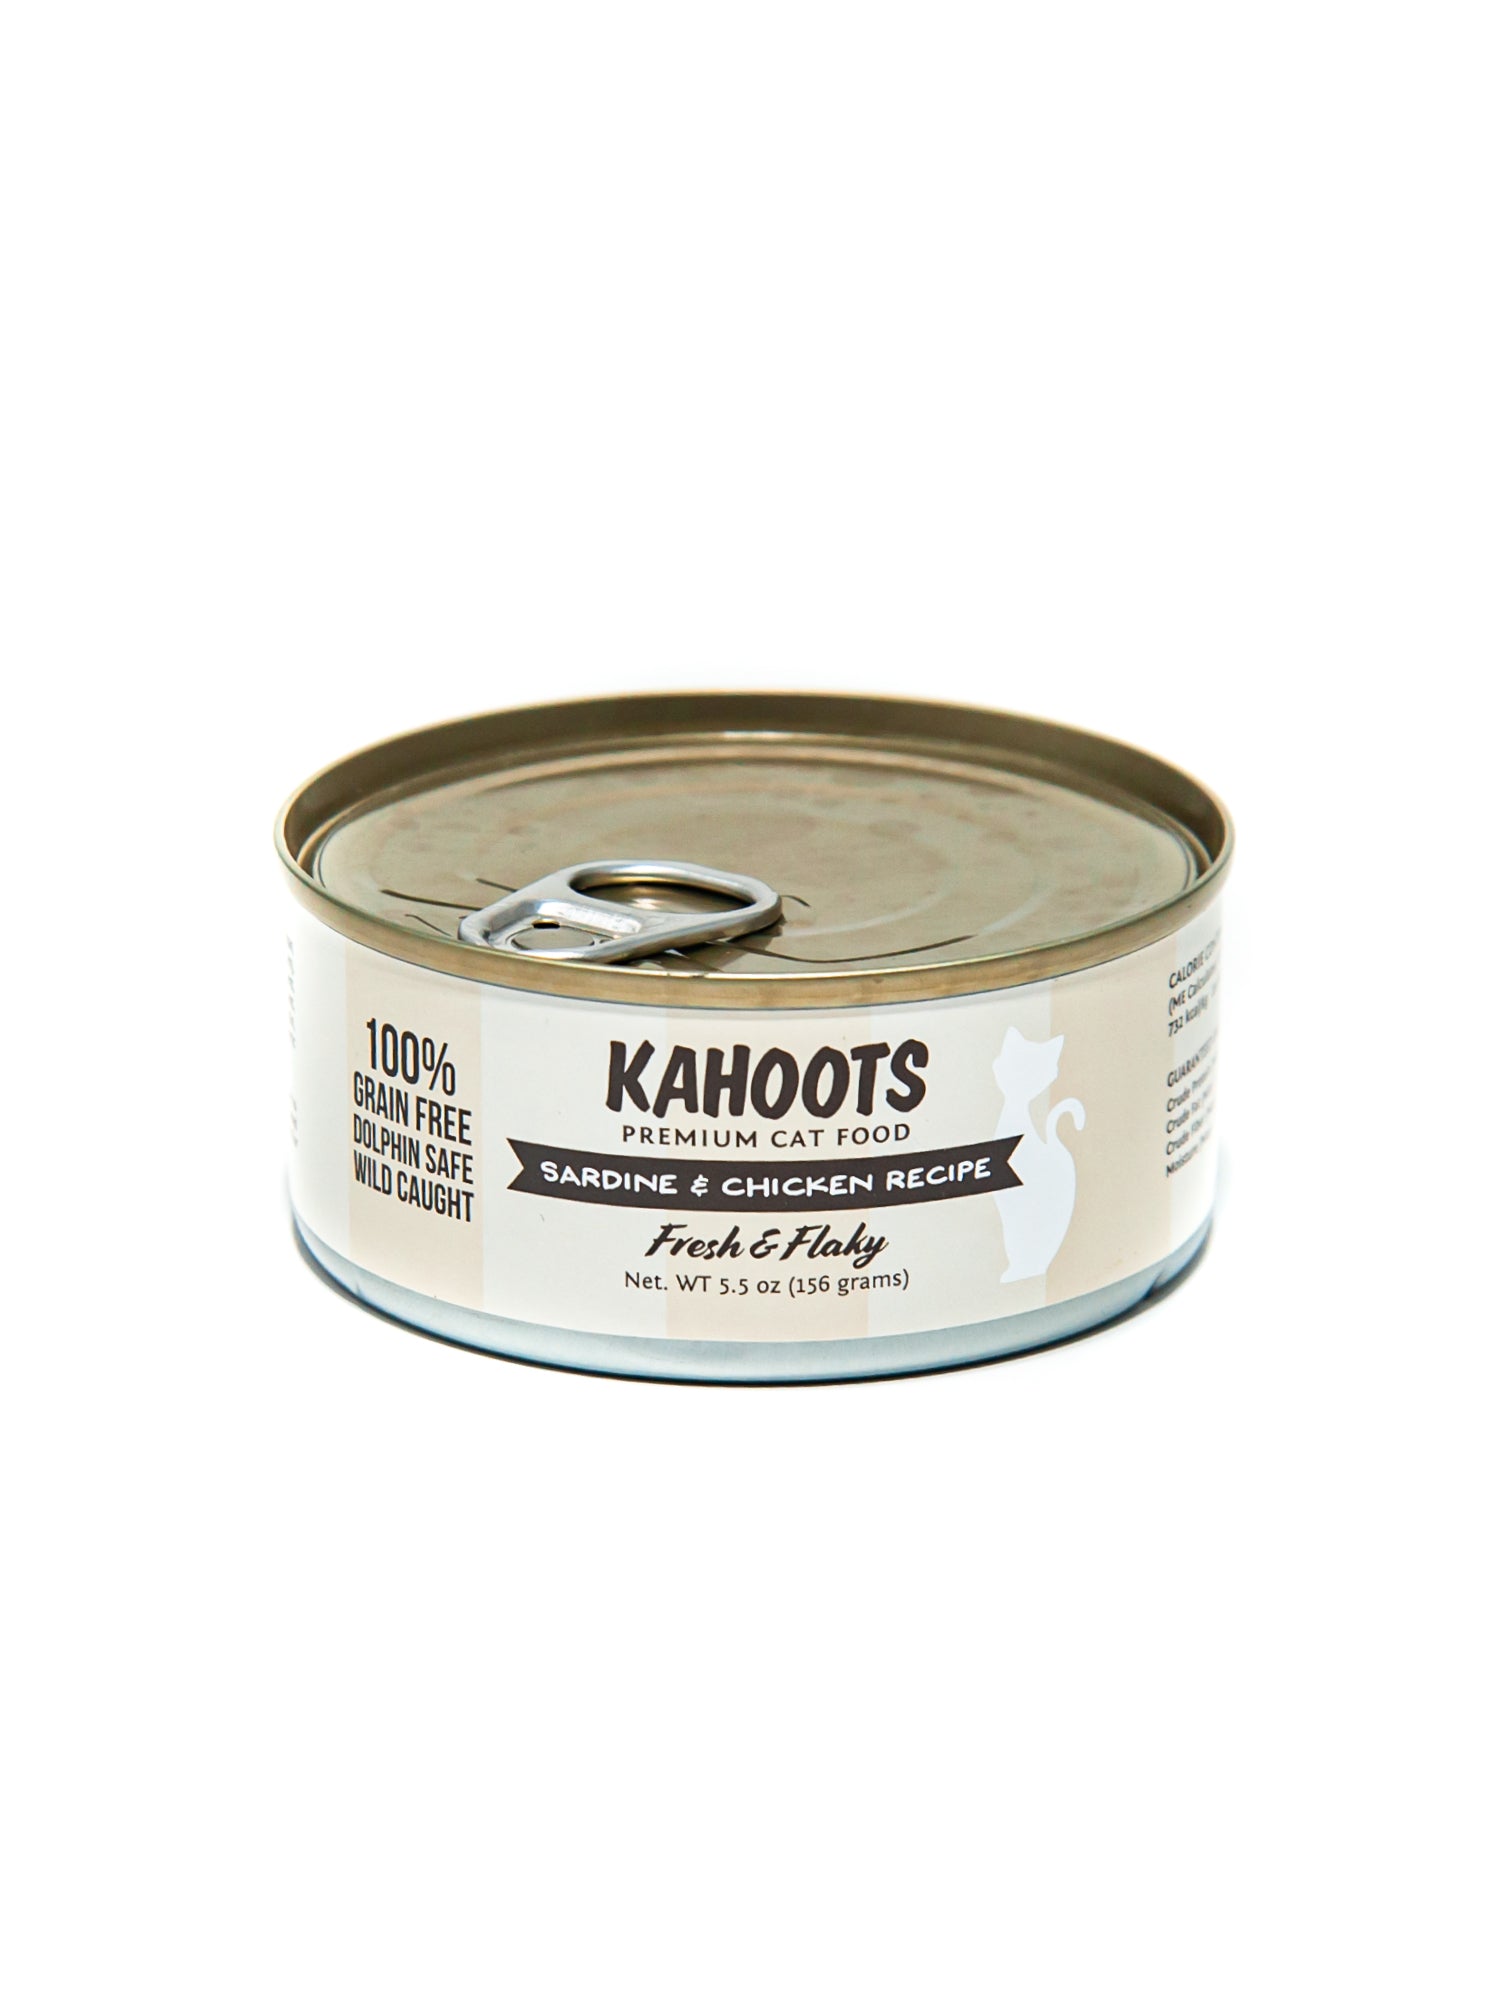 Sardine and Chicken wet cat food. White cat over cream colored striped background on the label